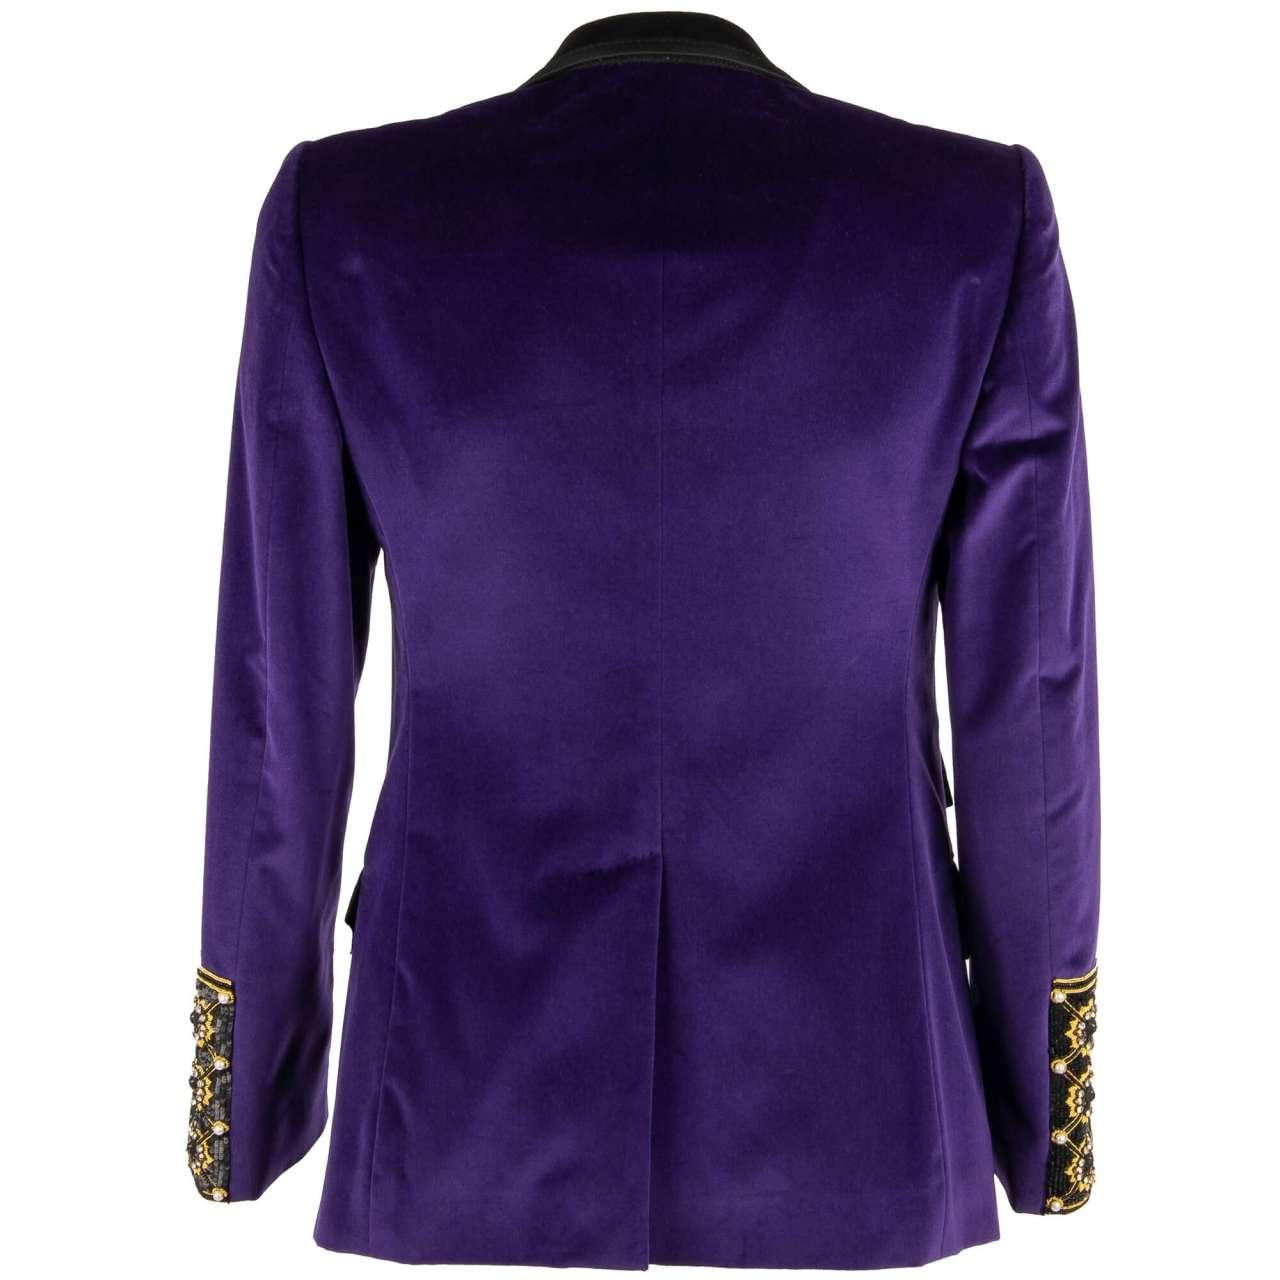 D&G Velvet Tuxedo Blazer with Crystals, Pearls and Sequins Purple Black 46 For Sale 1